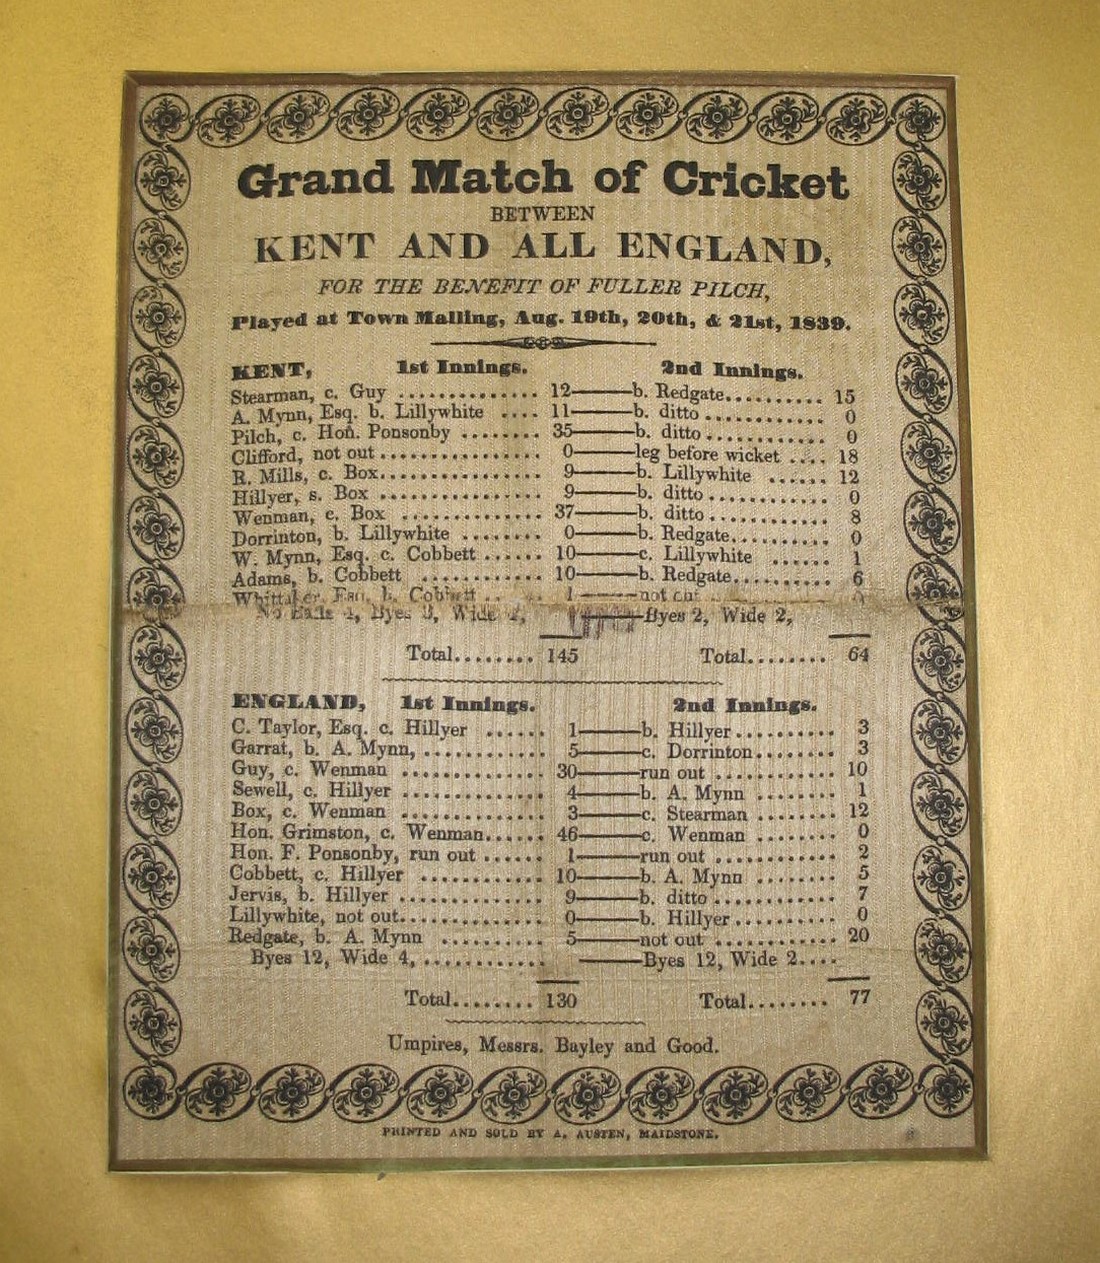 [CRICKET] printed silk score card for KENT v. ALL ENGLAND match, 1839, published by A. Austen,